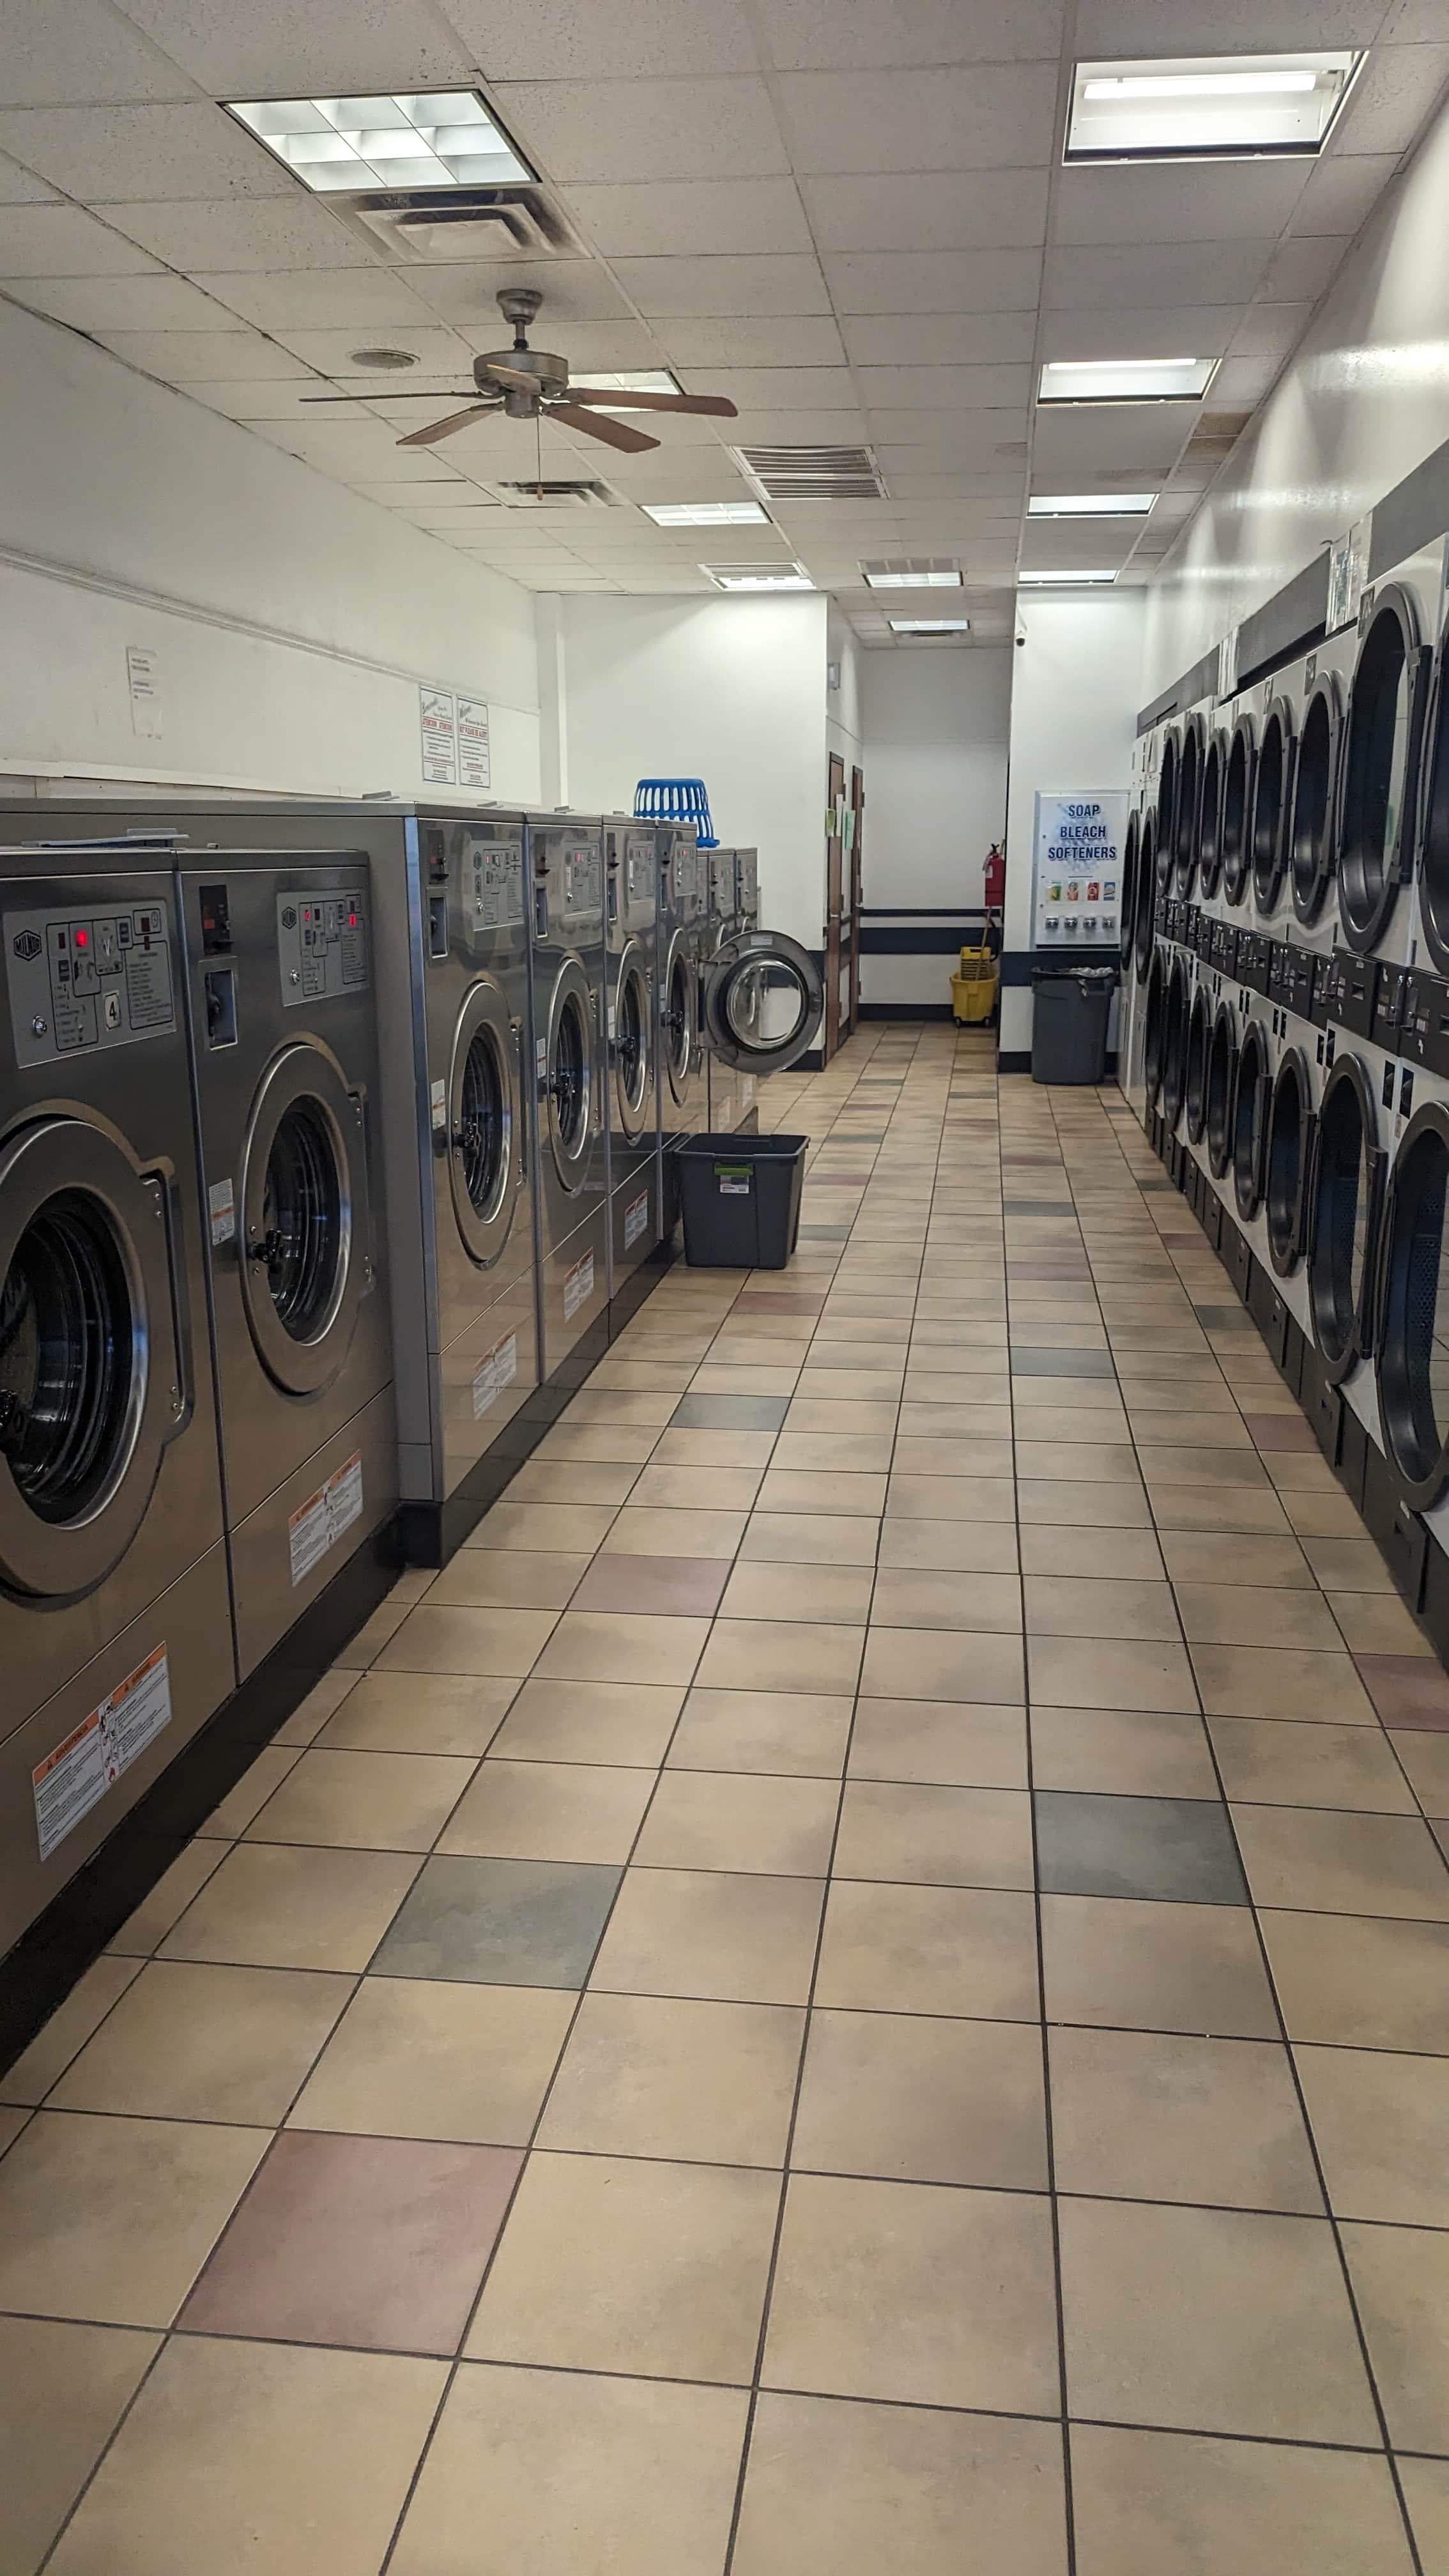 Irondale Coin Laundry, US, 24 hour laundromat near me